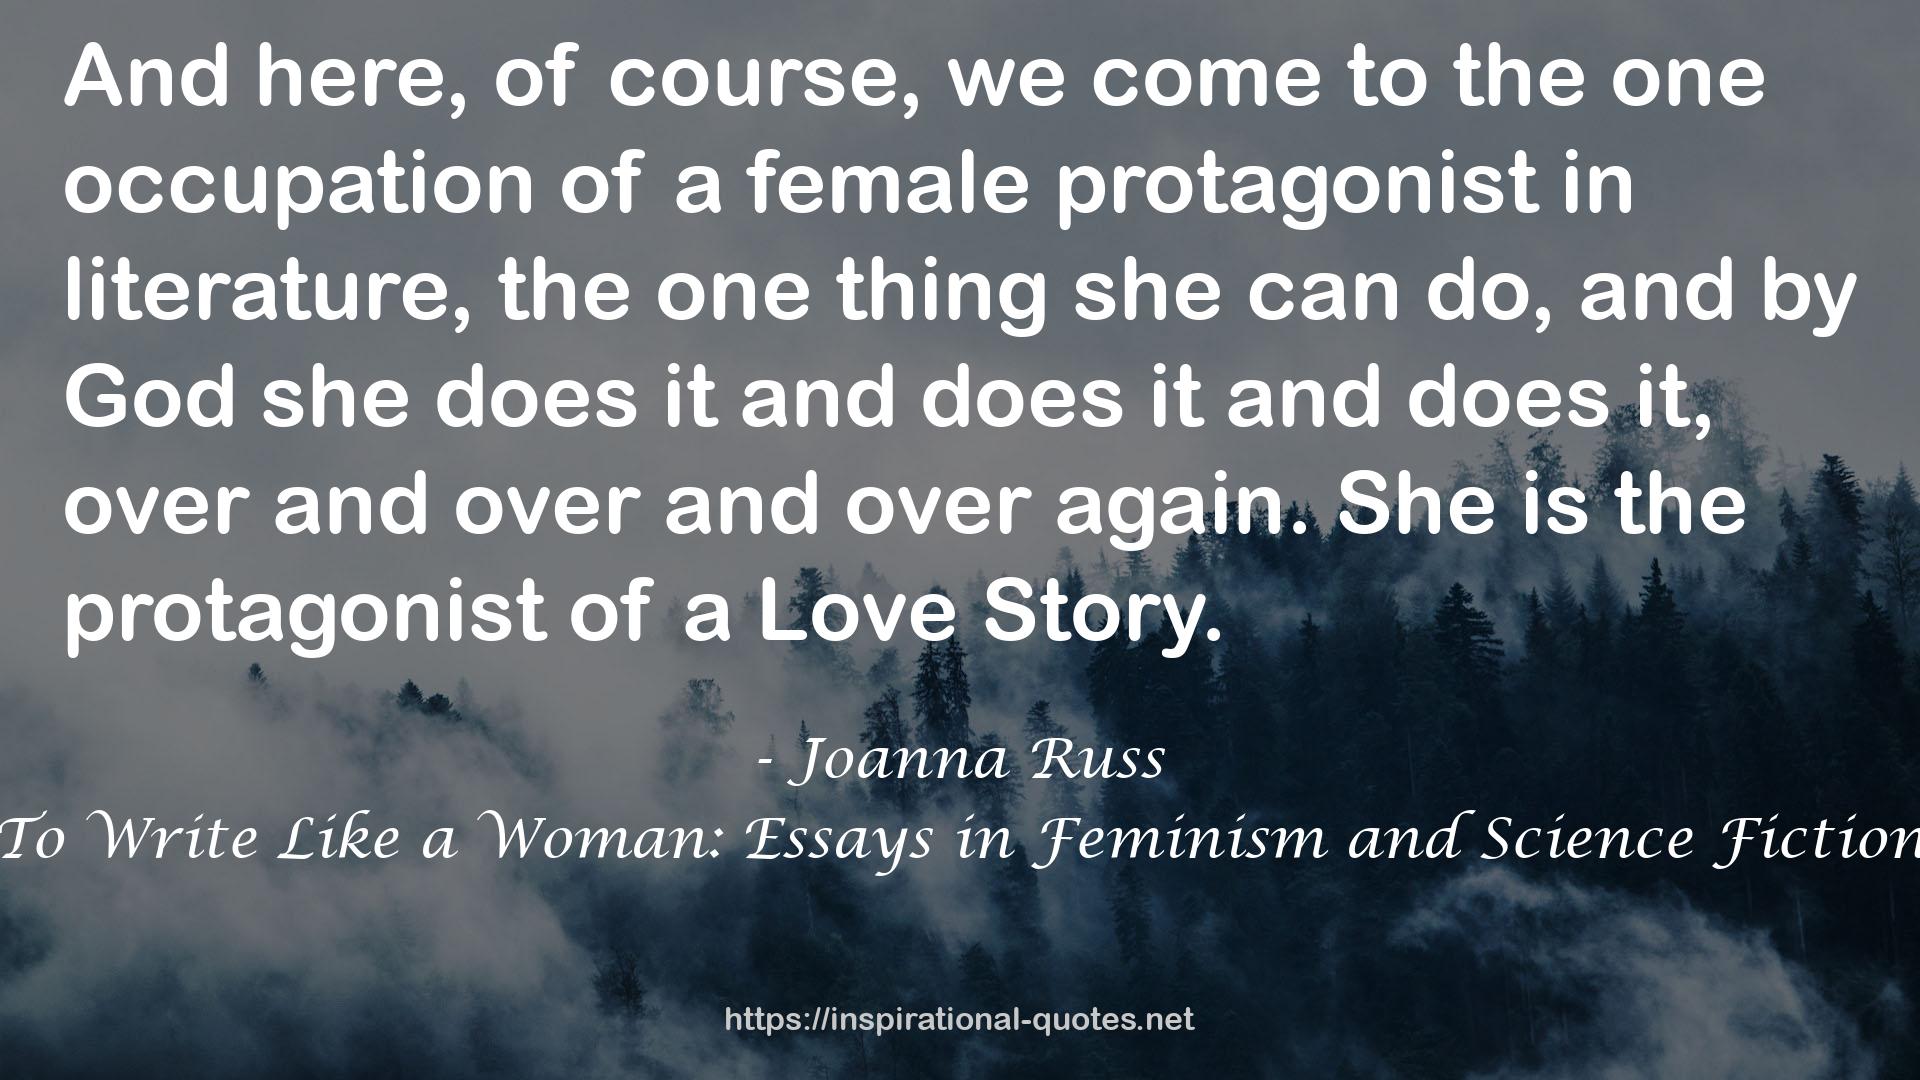 To Write Like a Woman: Essays in Feminism and Science Fiction QUOTES